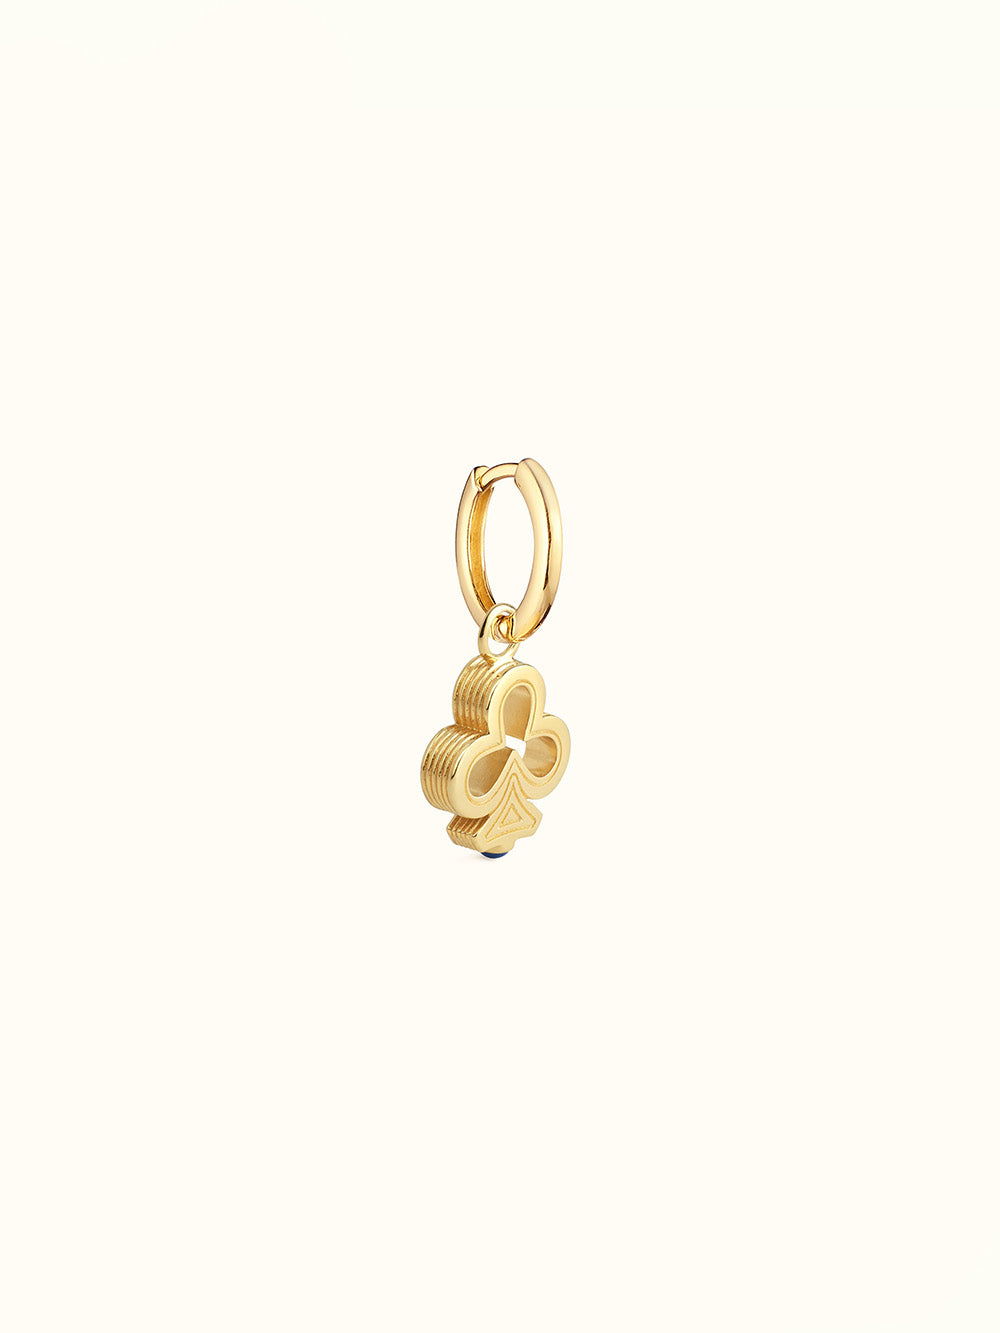 BABY CHARM CLOVER GOLD AND BLUE SAPPHIRE EARRING